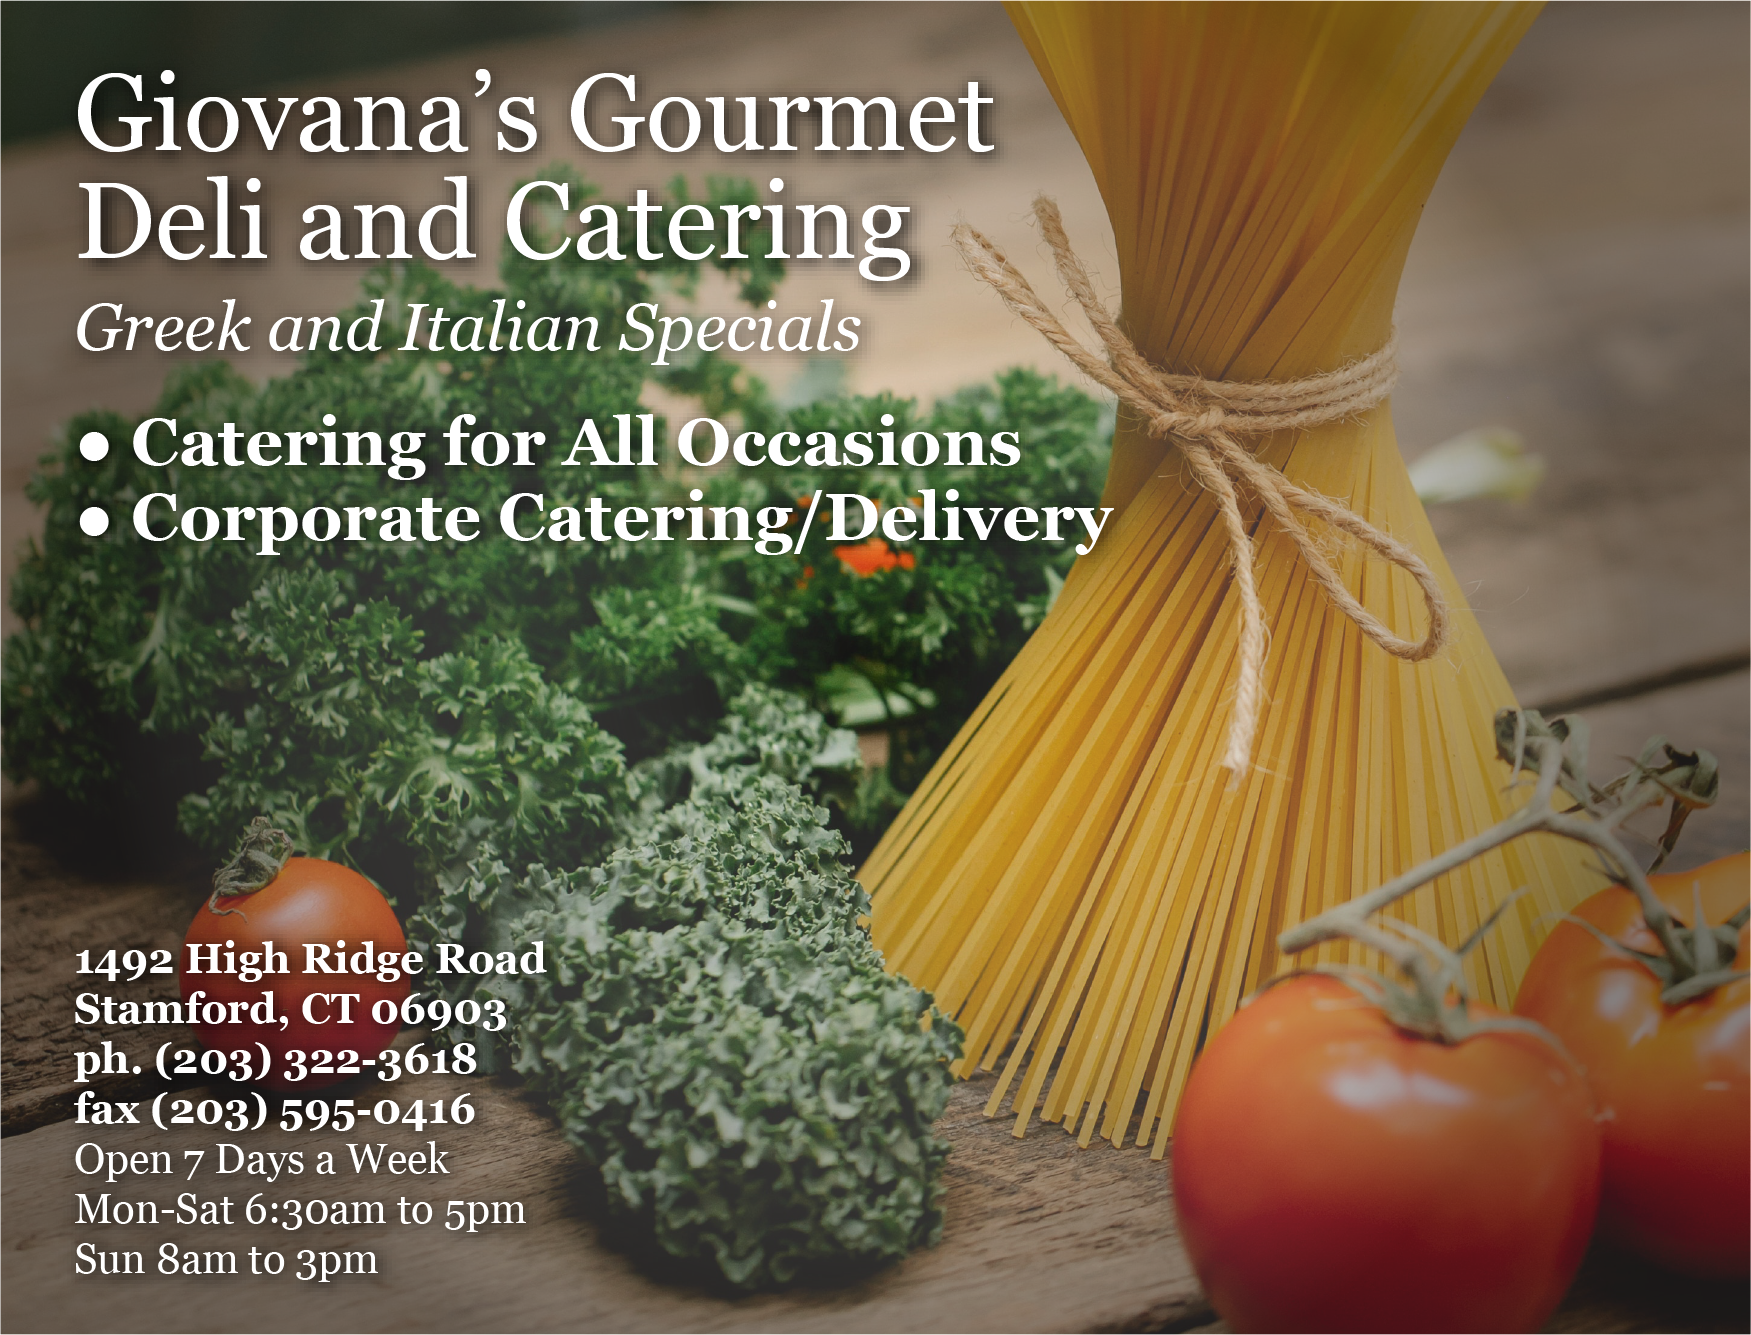 Giovana's Gourmet Deli and Catering